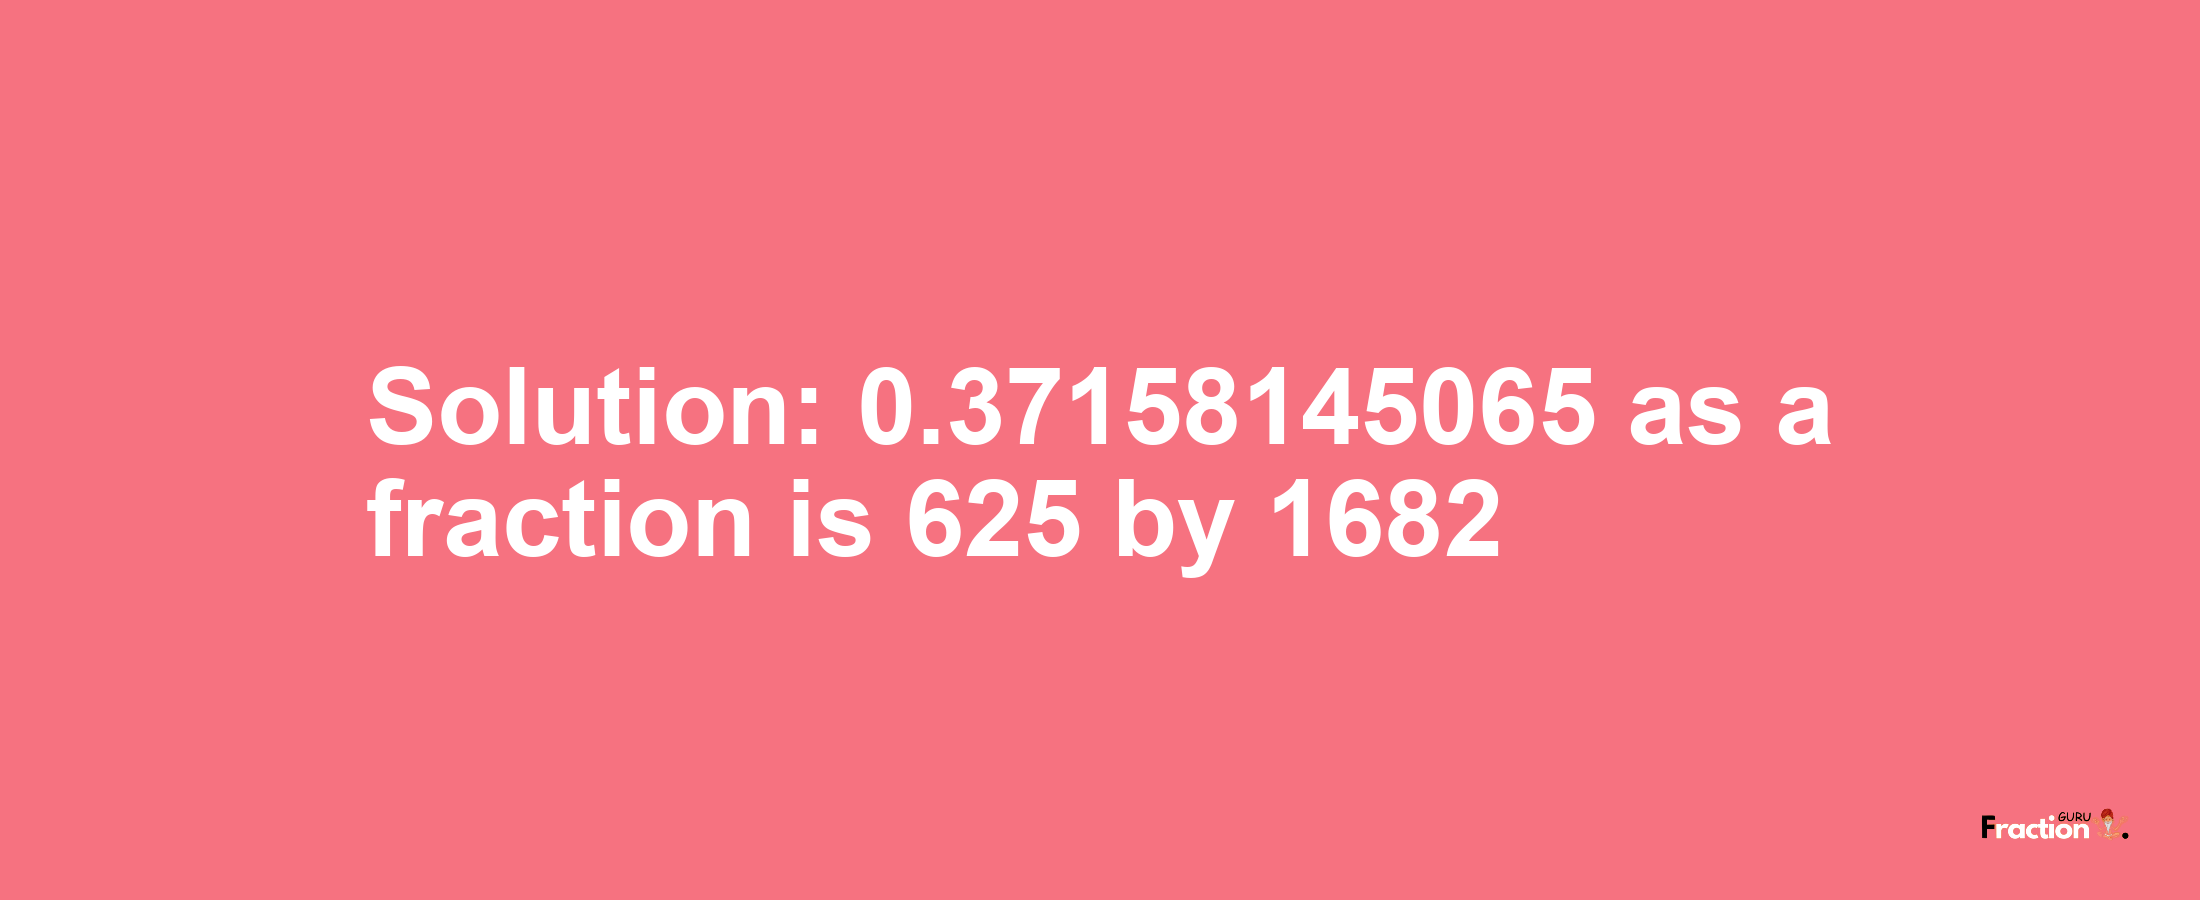 Solution:0.37158145065 as a fraction is 625/1682